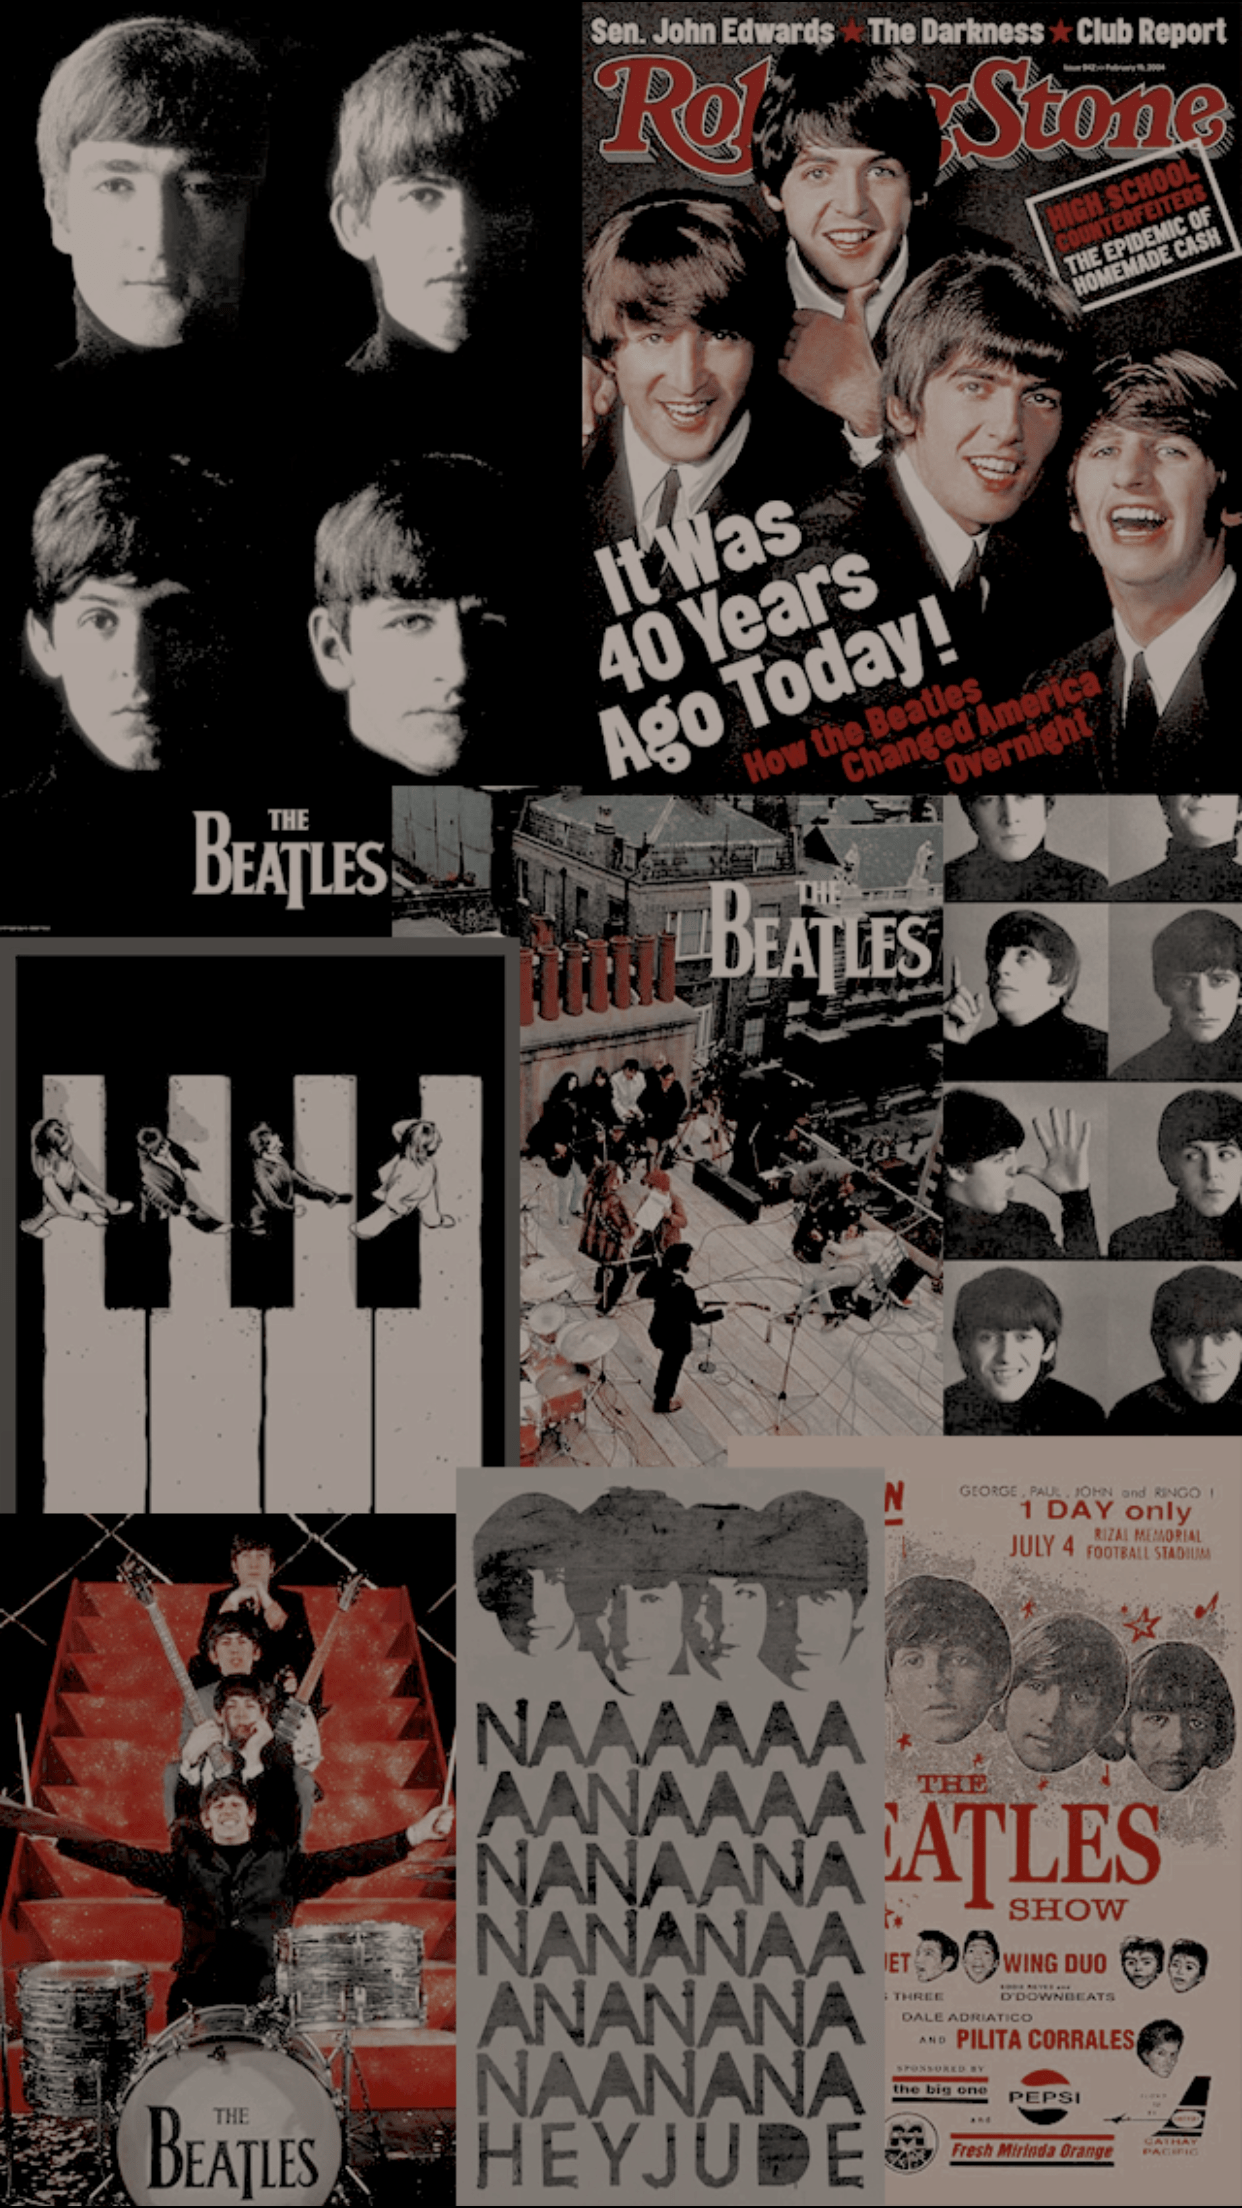 A collage of The Beatles images including photos, advertisements, and newspaper clippings. - Rock